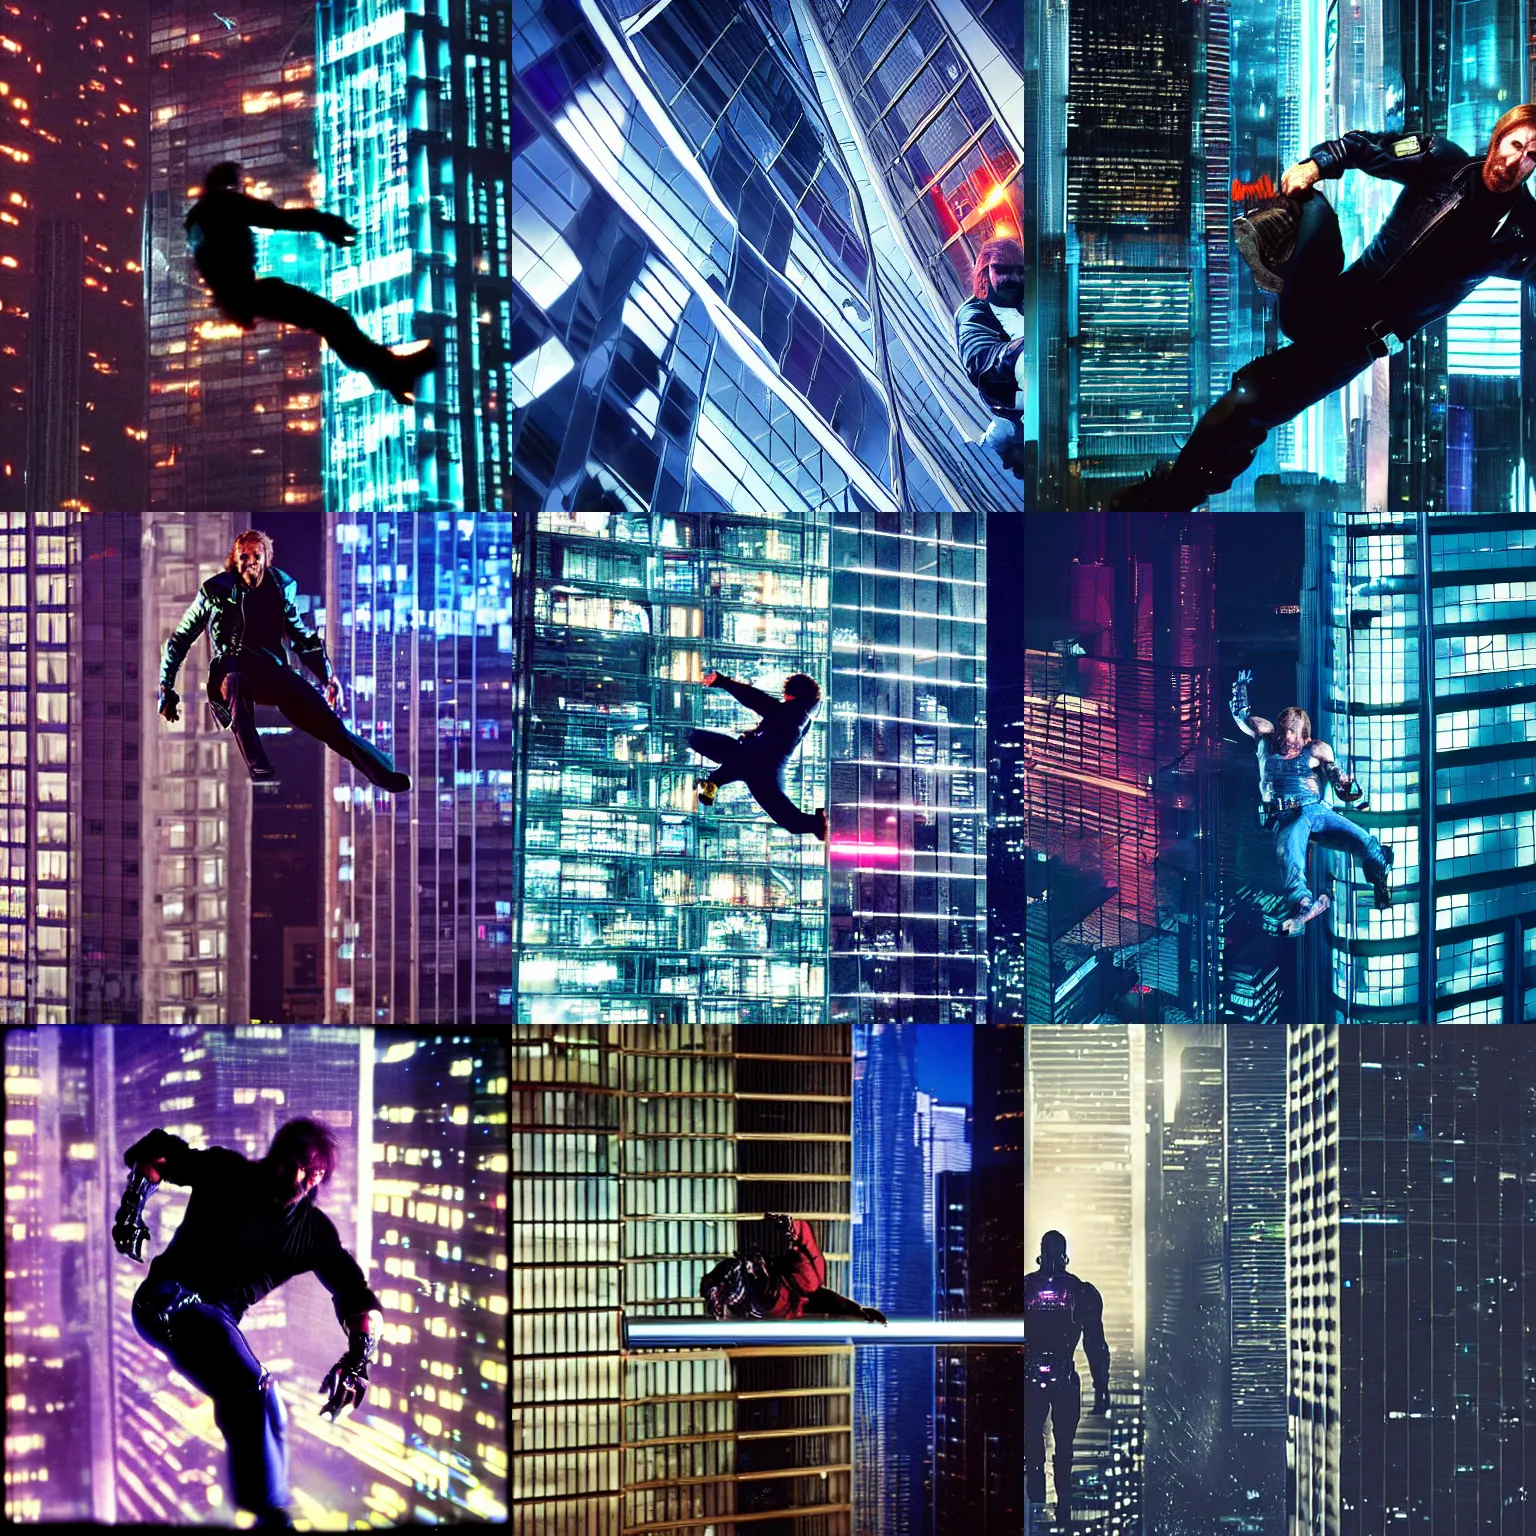 Prompt: a real photograph of cyberpunk chuck norris sliding down a sleek glass building at night.